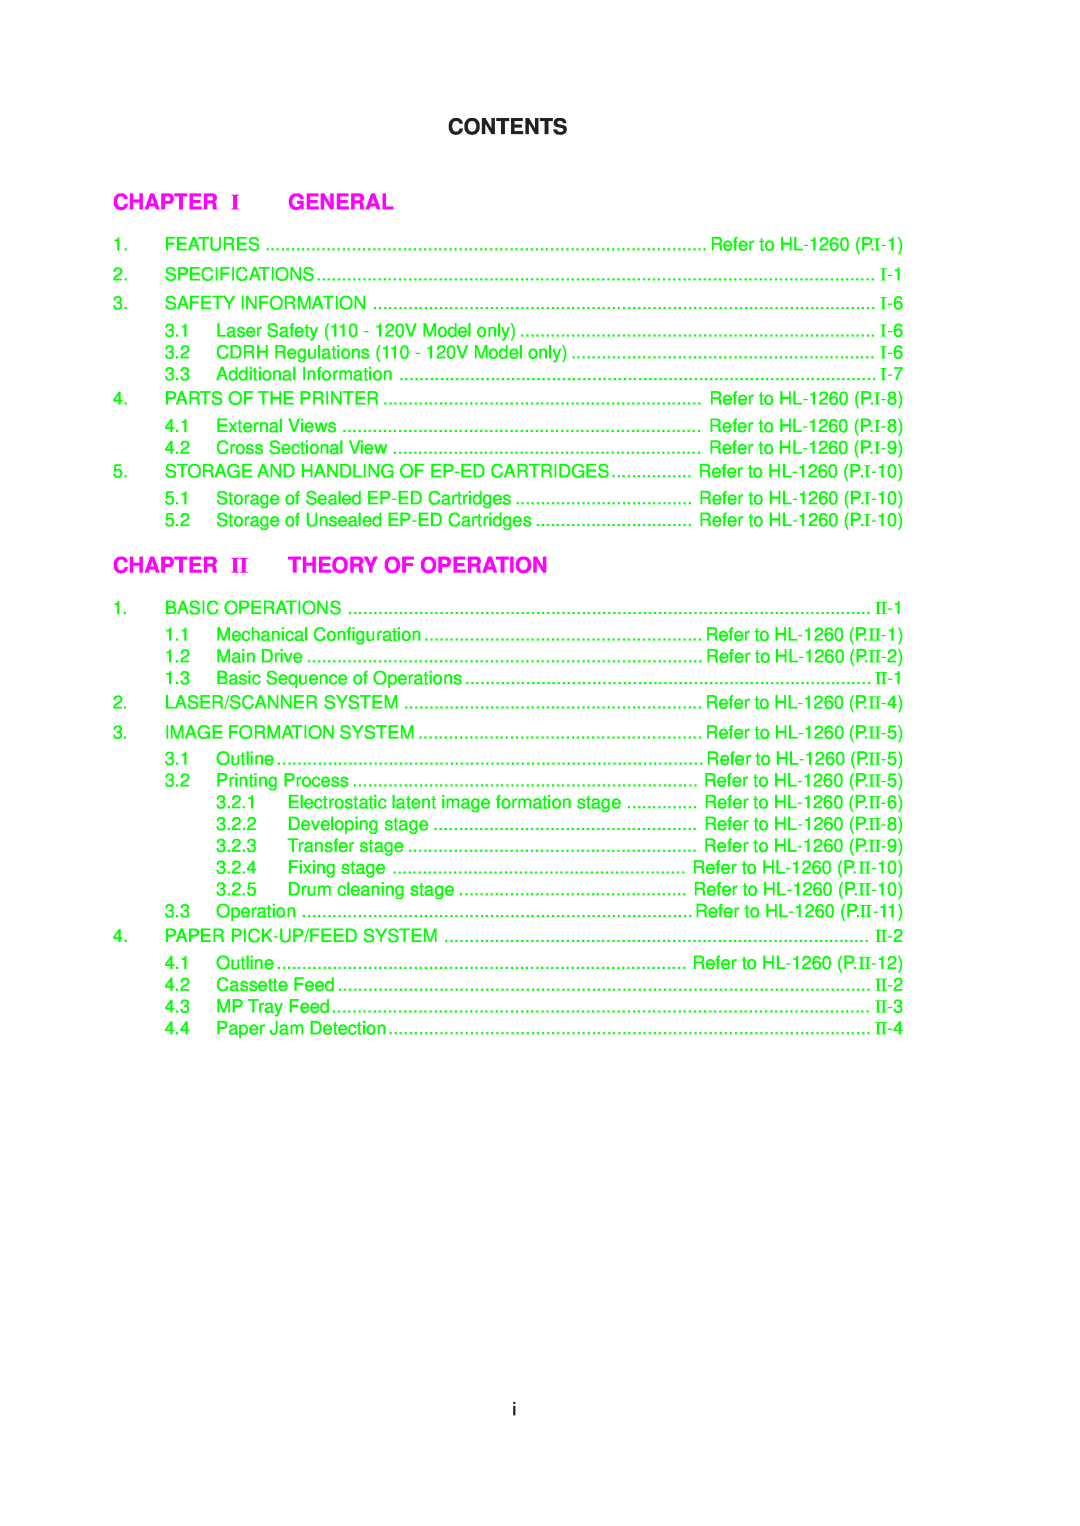 Brother 1660 service manual Chapter, General, Theory Of Operation, II-1, II-2, II-3, II-4, Contents 